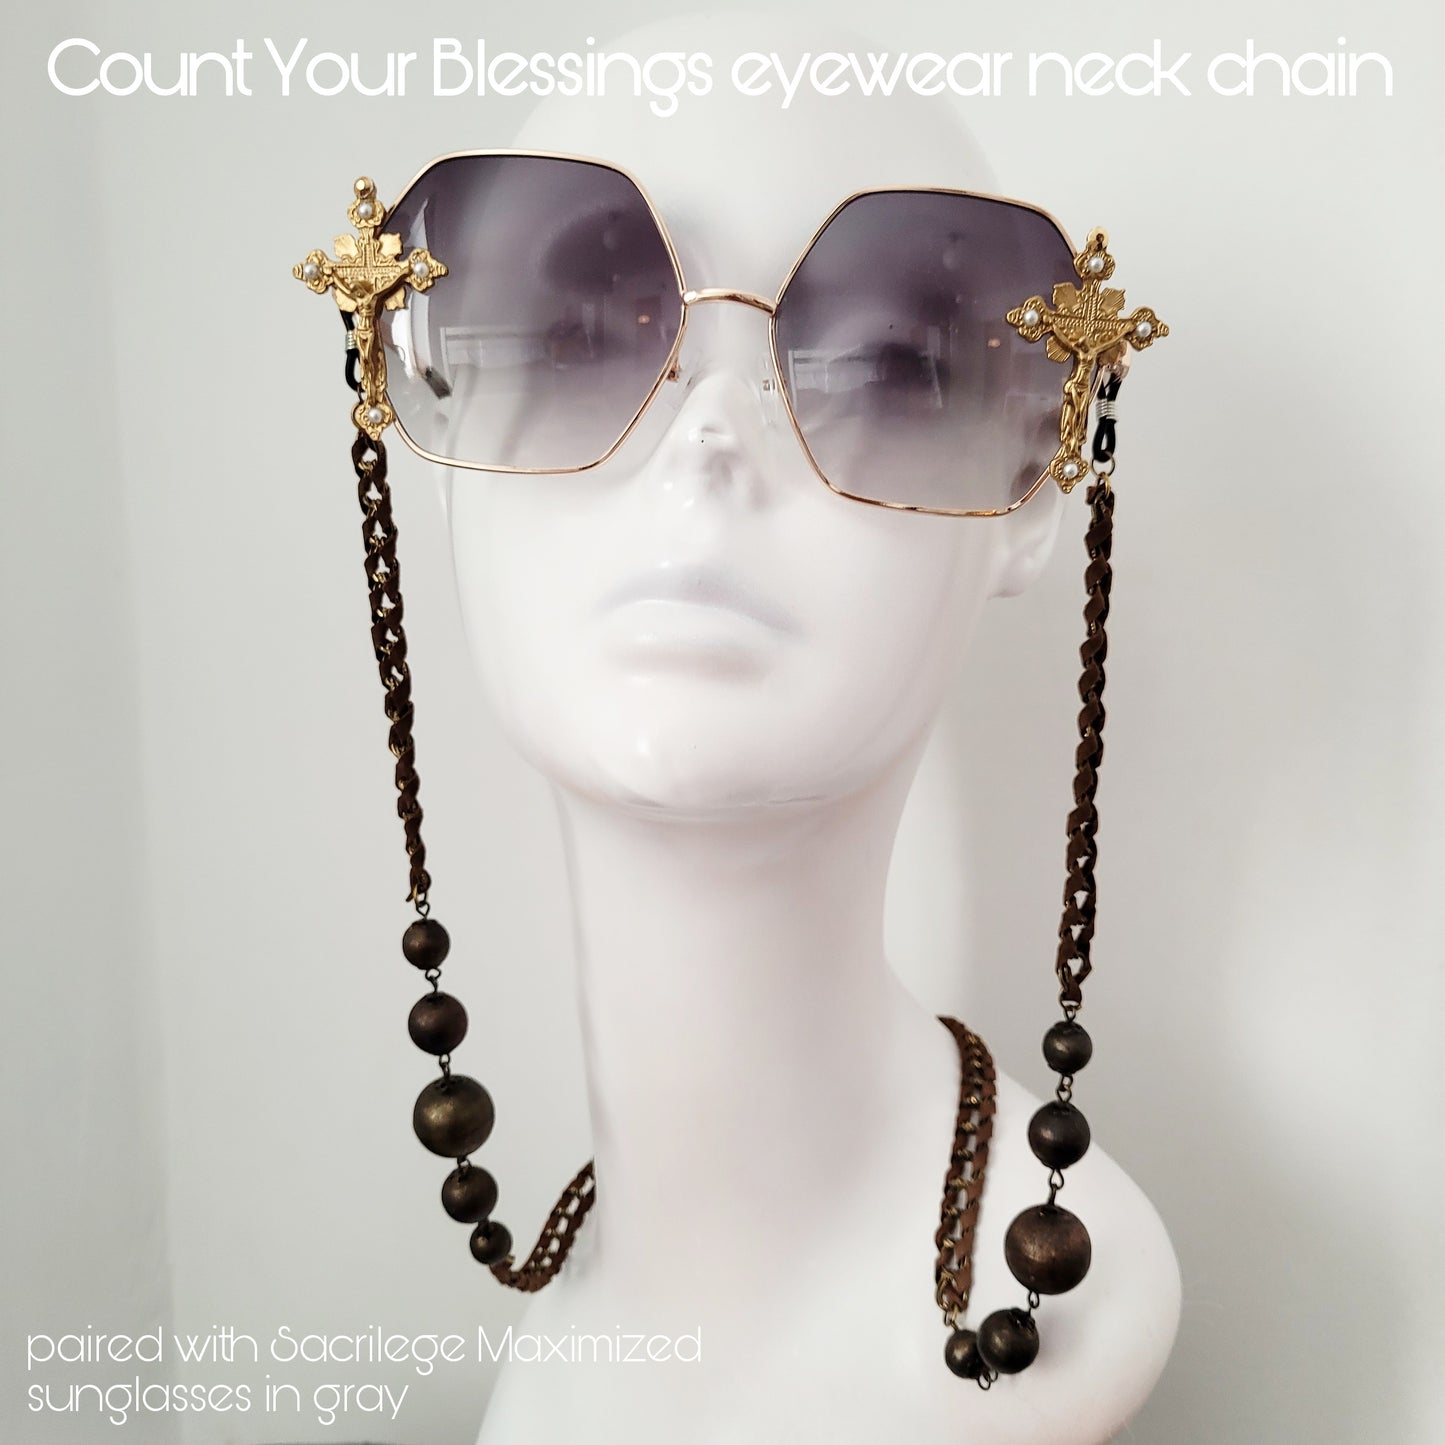 Neckscape sustainable collection: Count Your Blessings EYEWEAR CHAIN